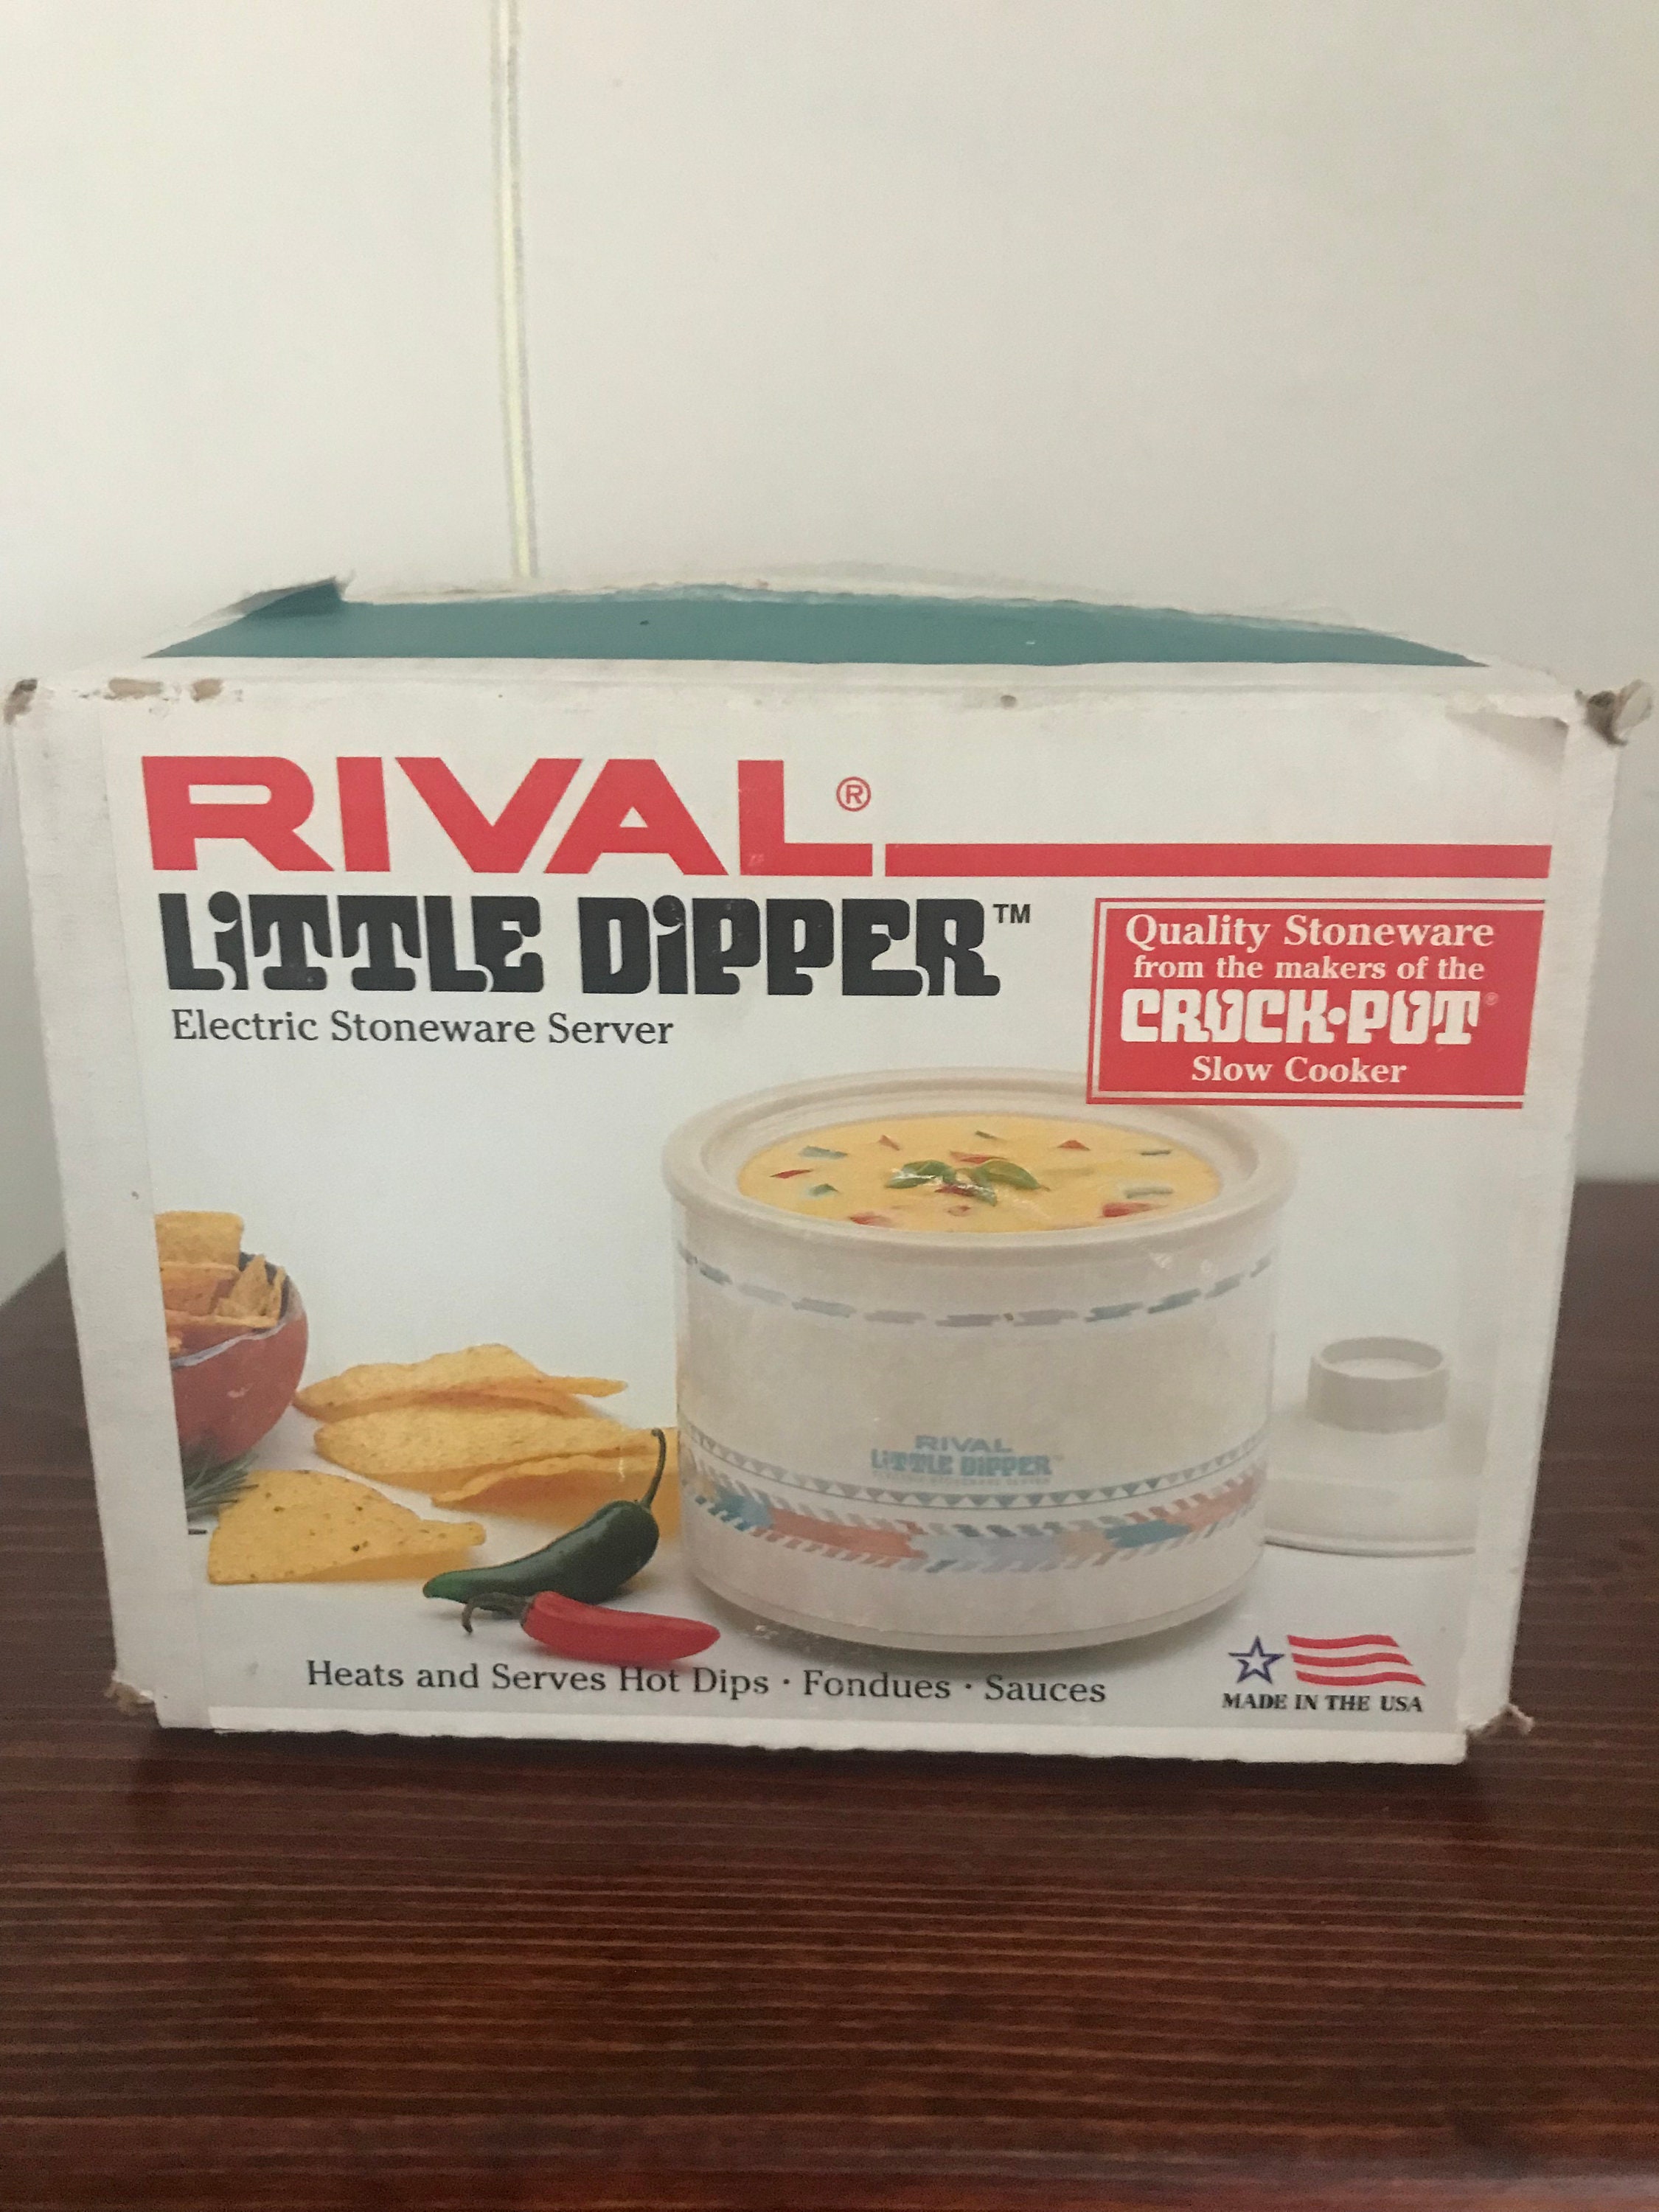 Crock Pot Little Dipper Premier Edition for Sale in Indianapolis, IN